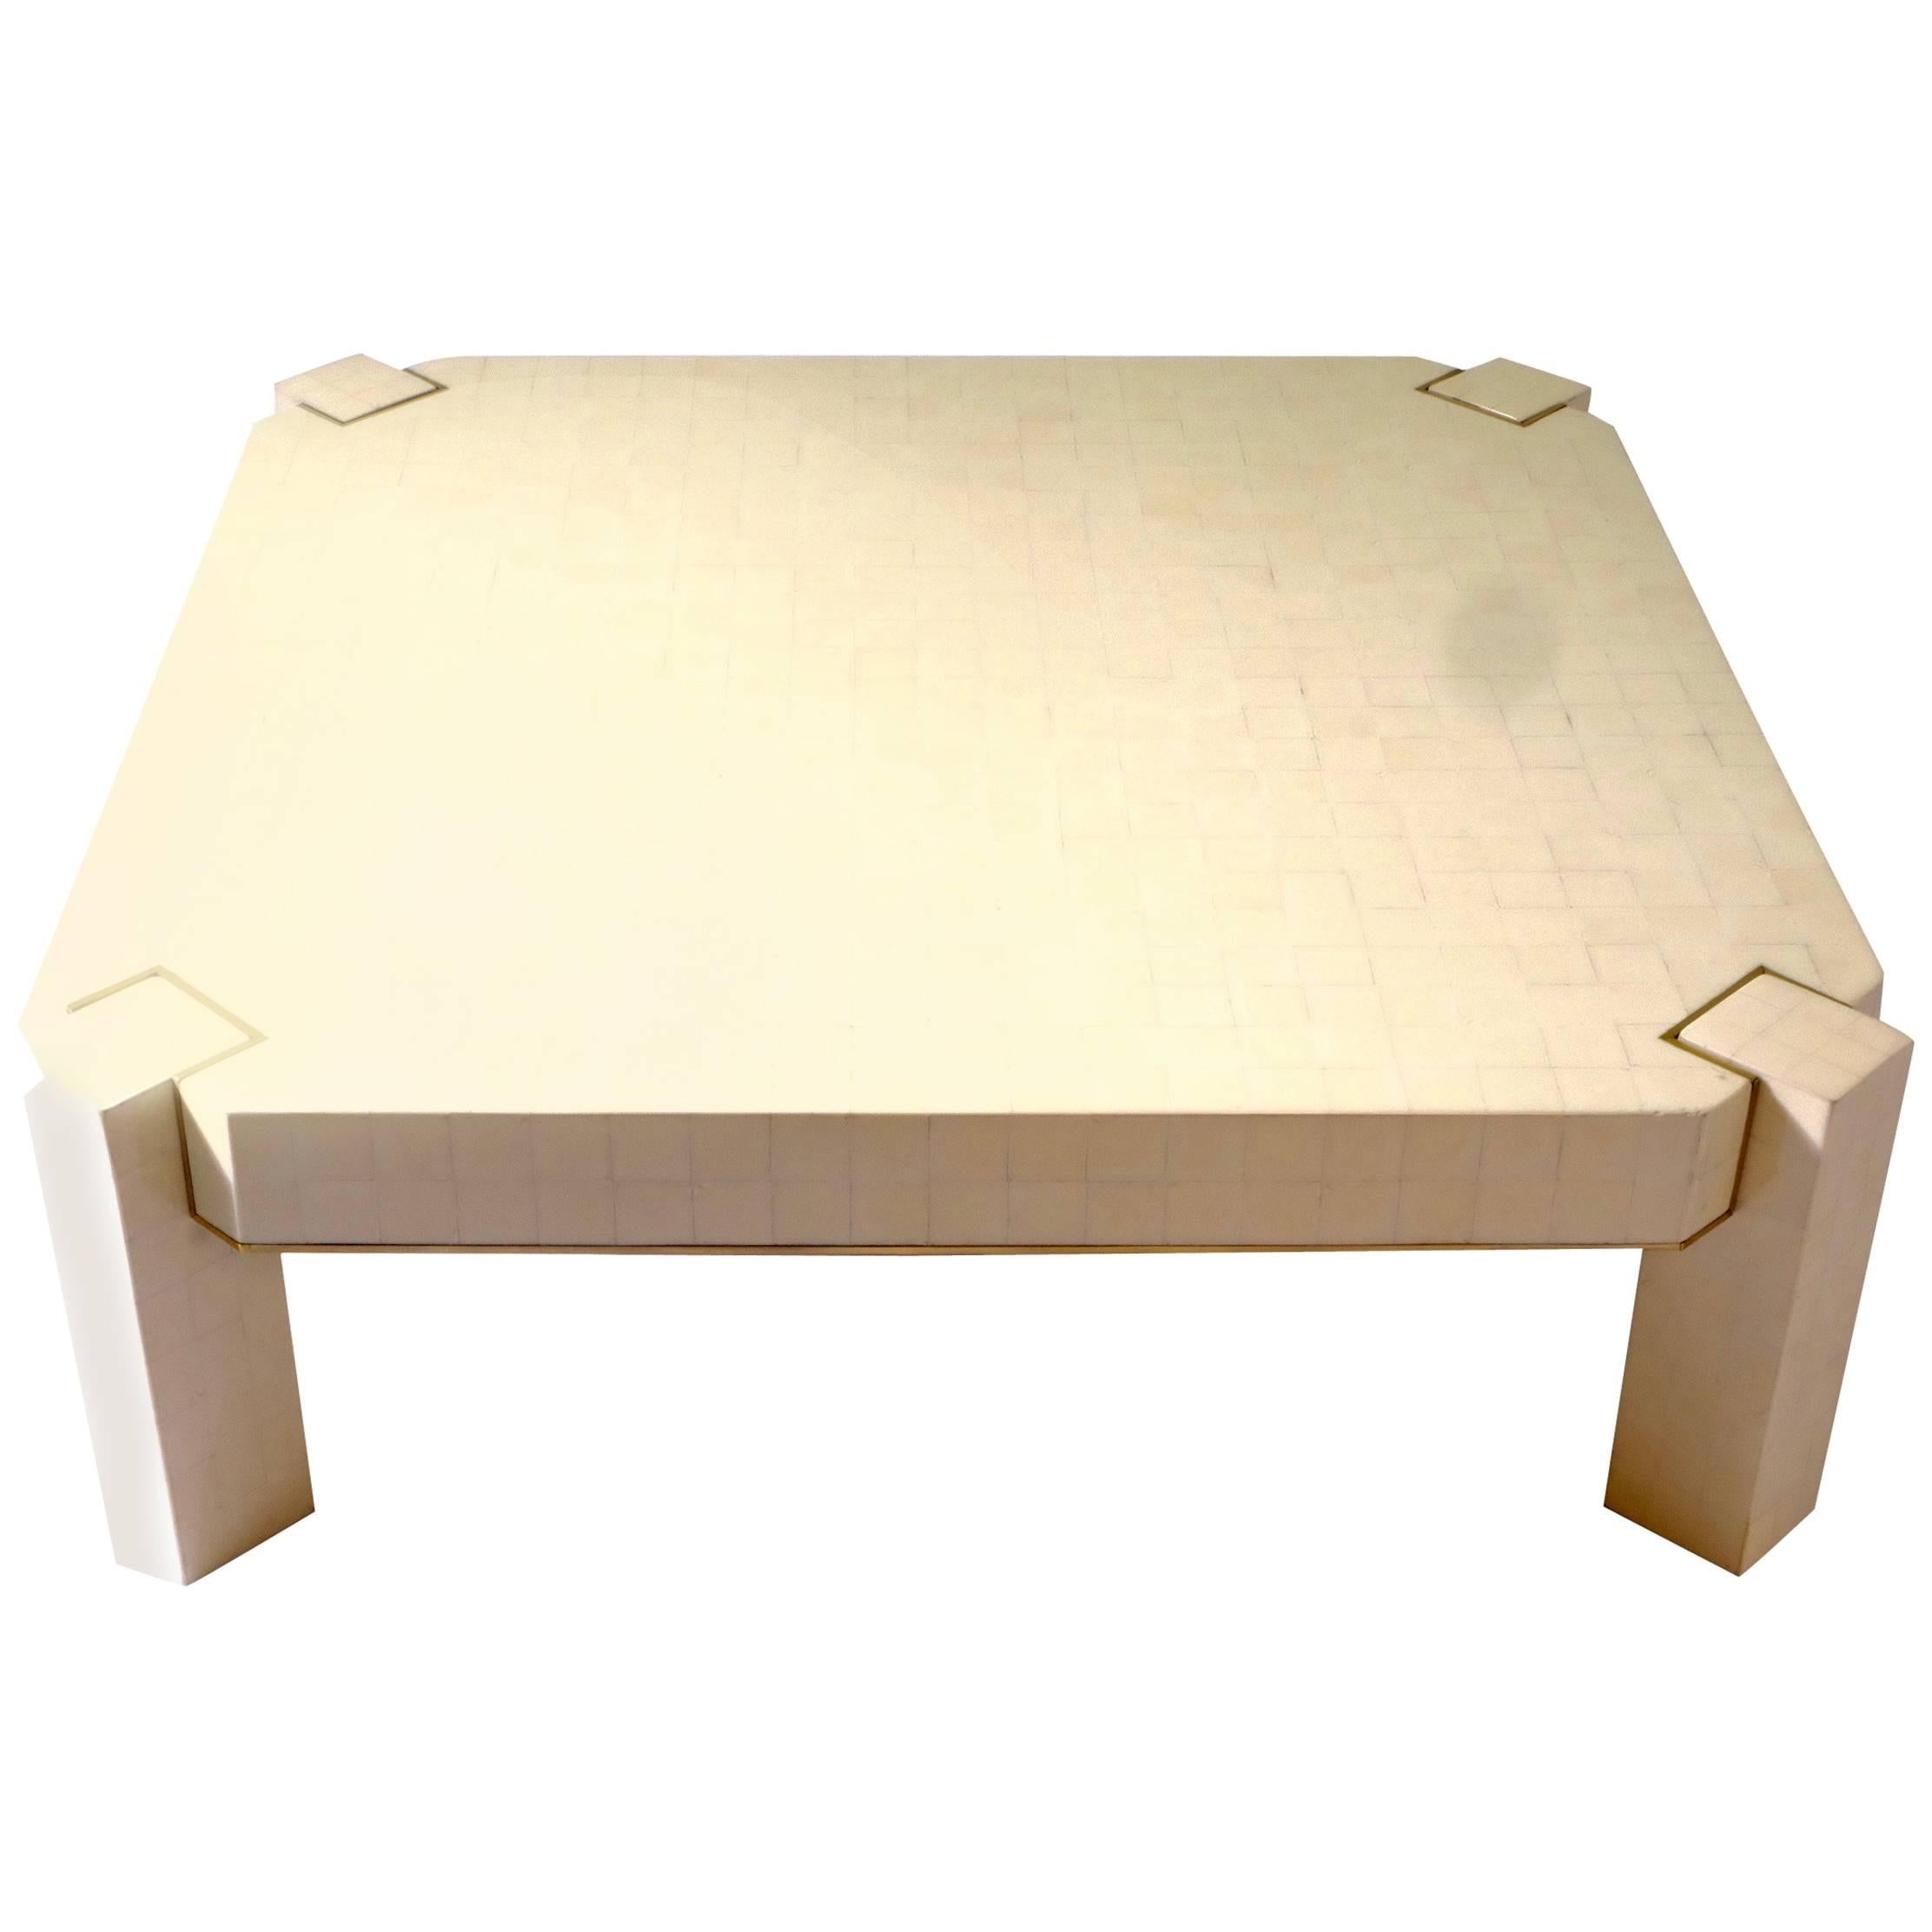 Square Coffee Table in Warthog Tooth, circa 1970